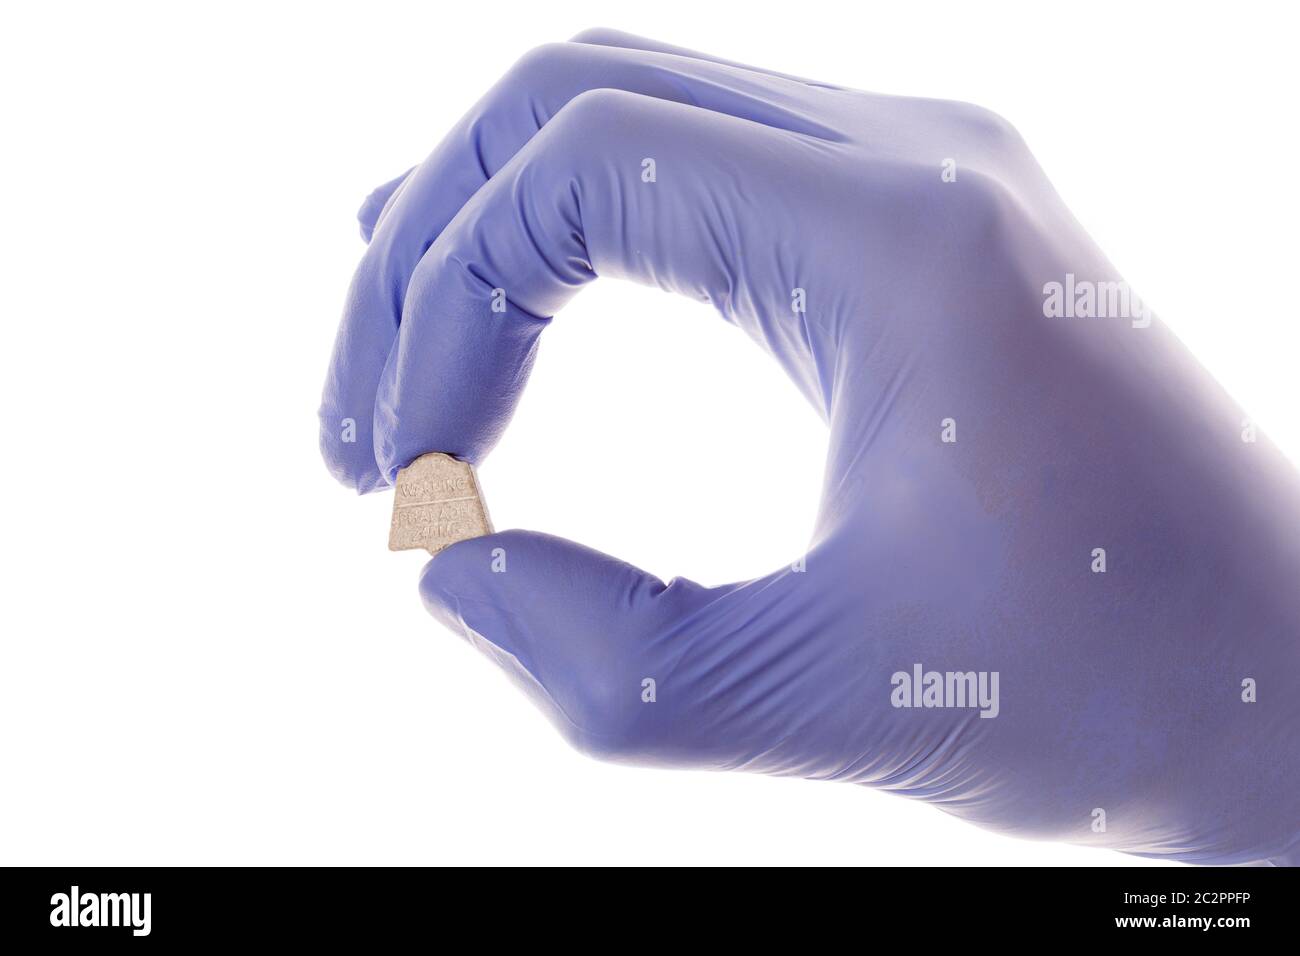 Ecstasy in doctor's hand. Clinical research, mdma assisted psychotherapy. Stock Photo